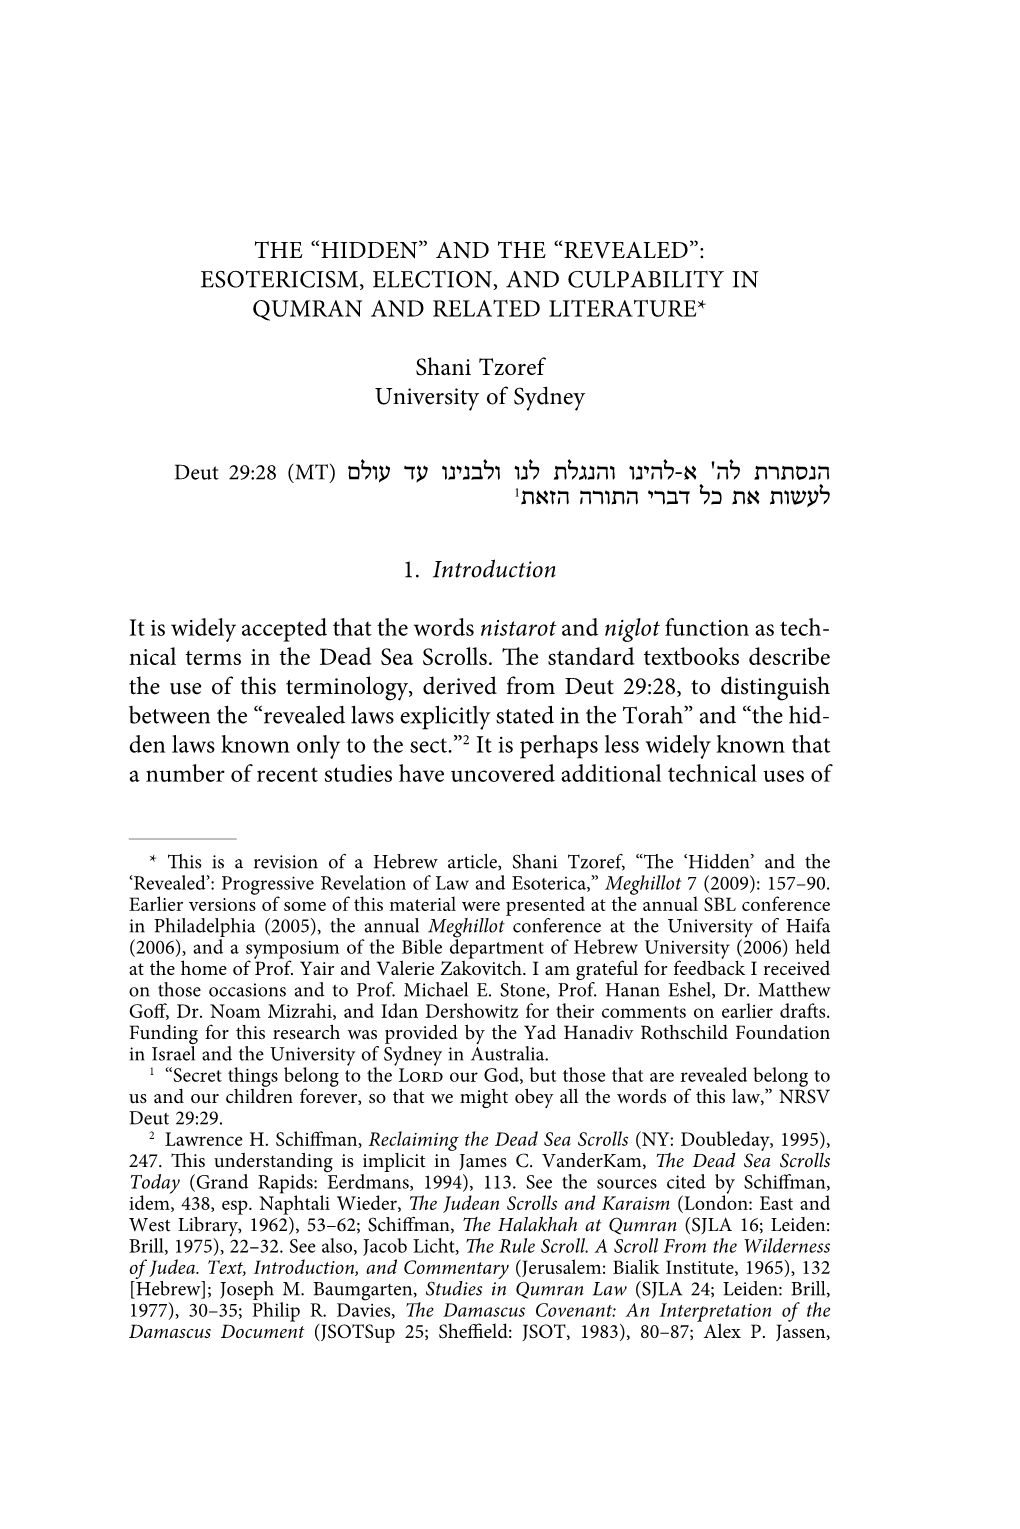 Esotericism, Election, and Culpability in Qumran and Related Literature*